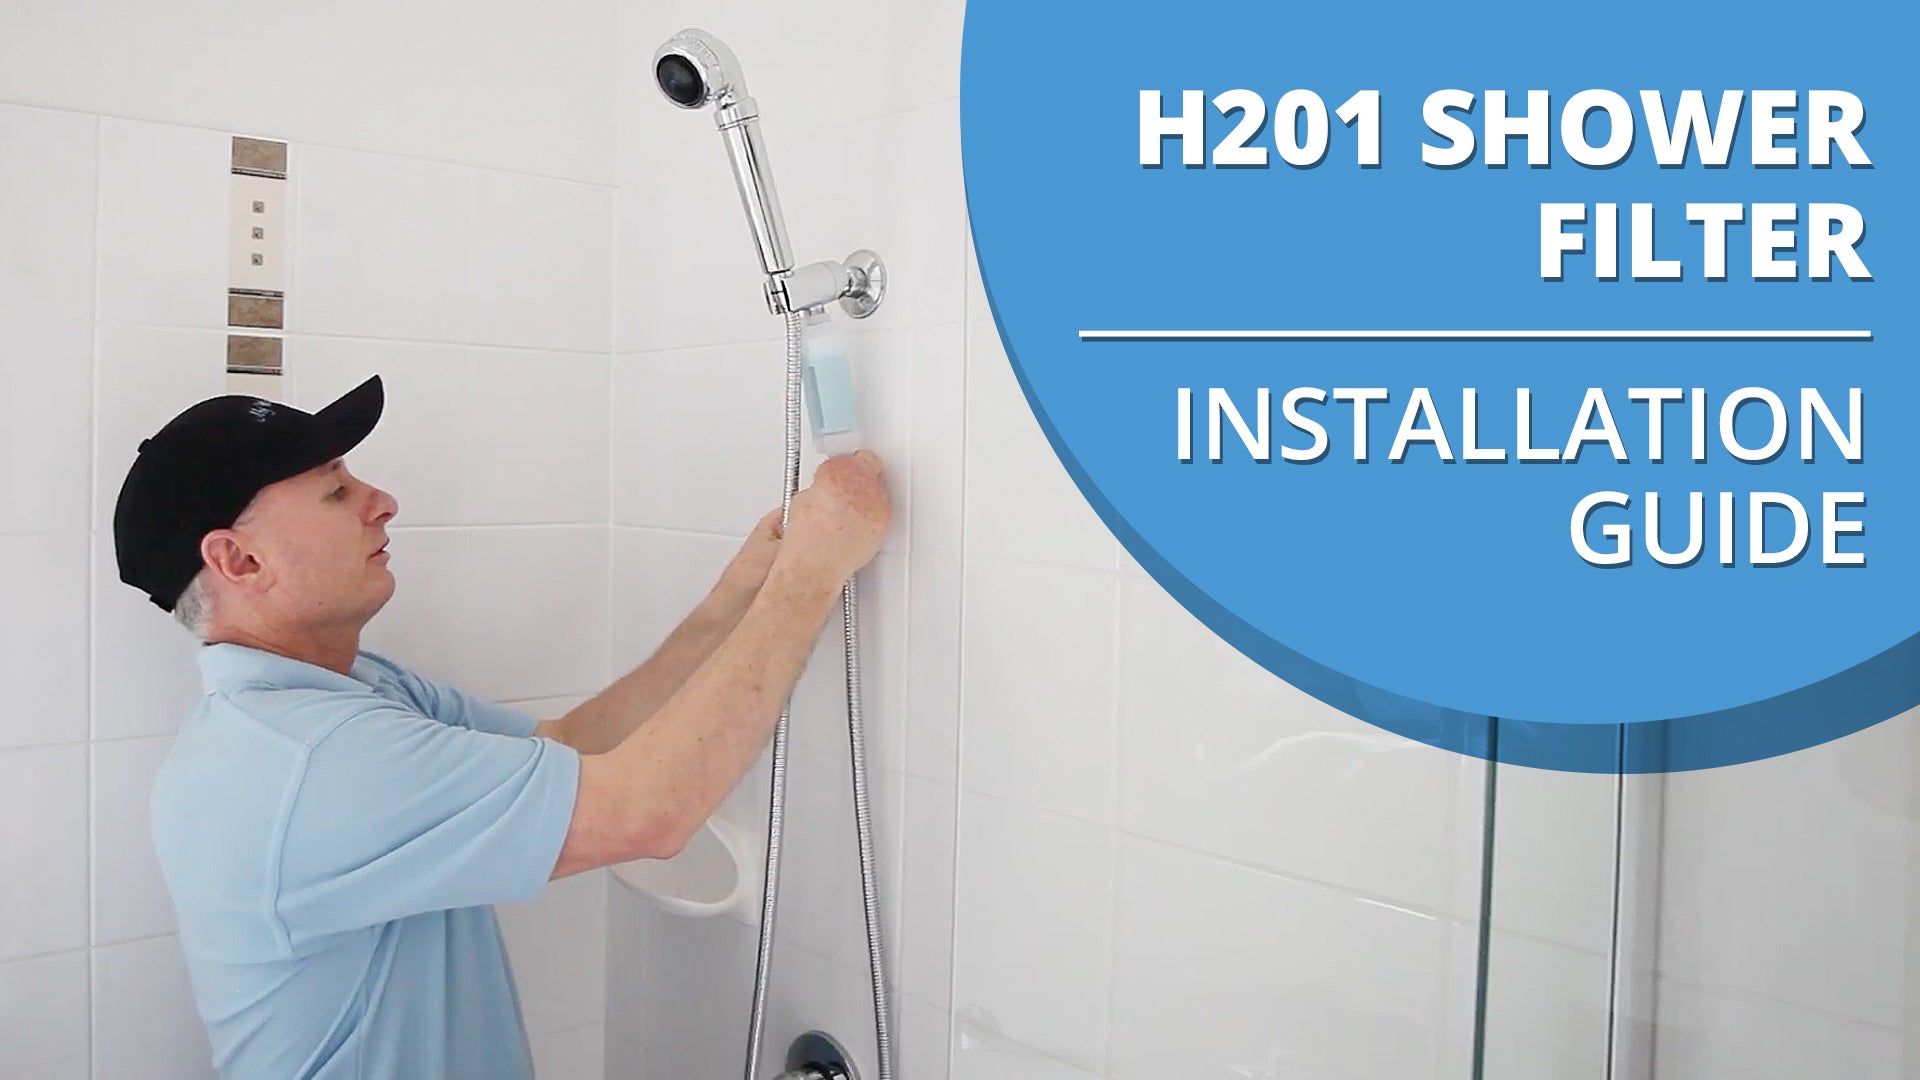 How to Install a H201 Shower Filter in 5 minutes [VIDEO]